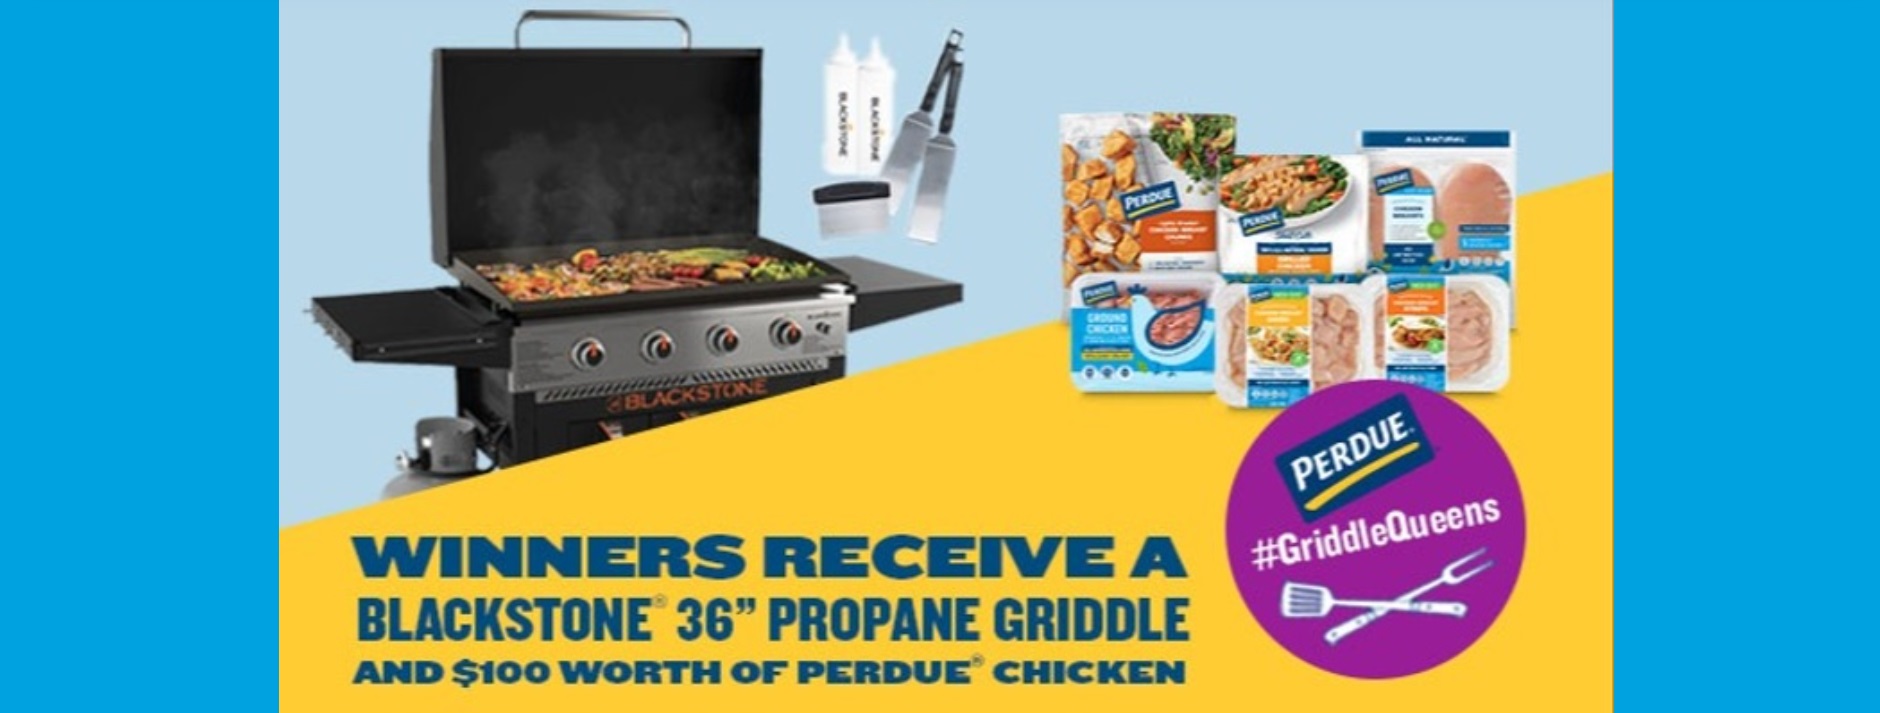 PERDUE Summer Griddle Queens Giveaway